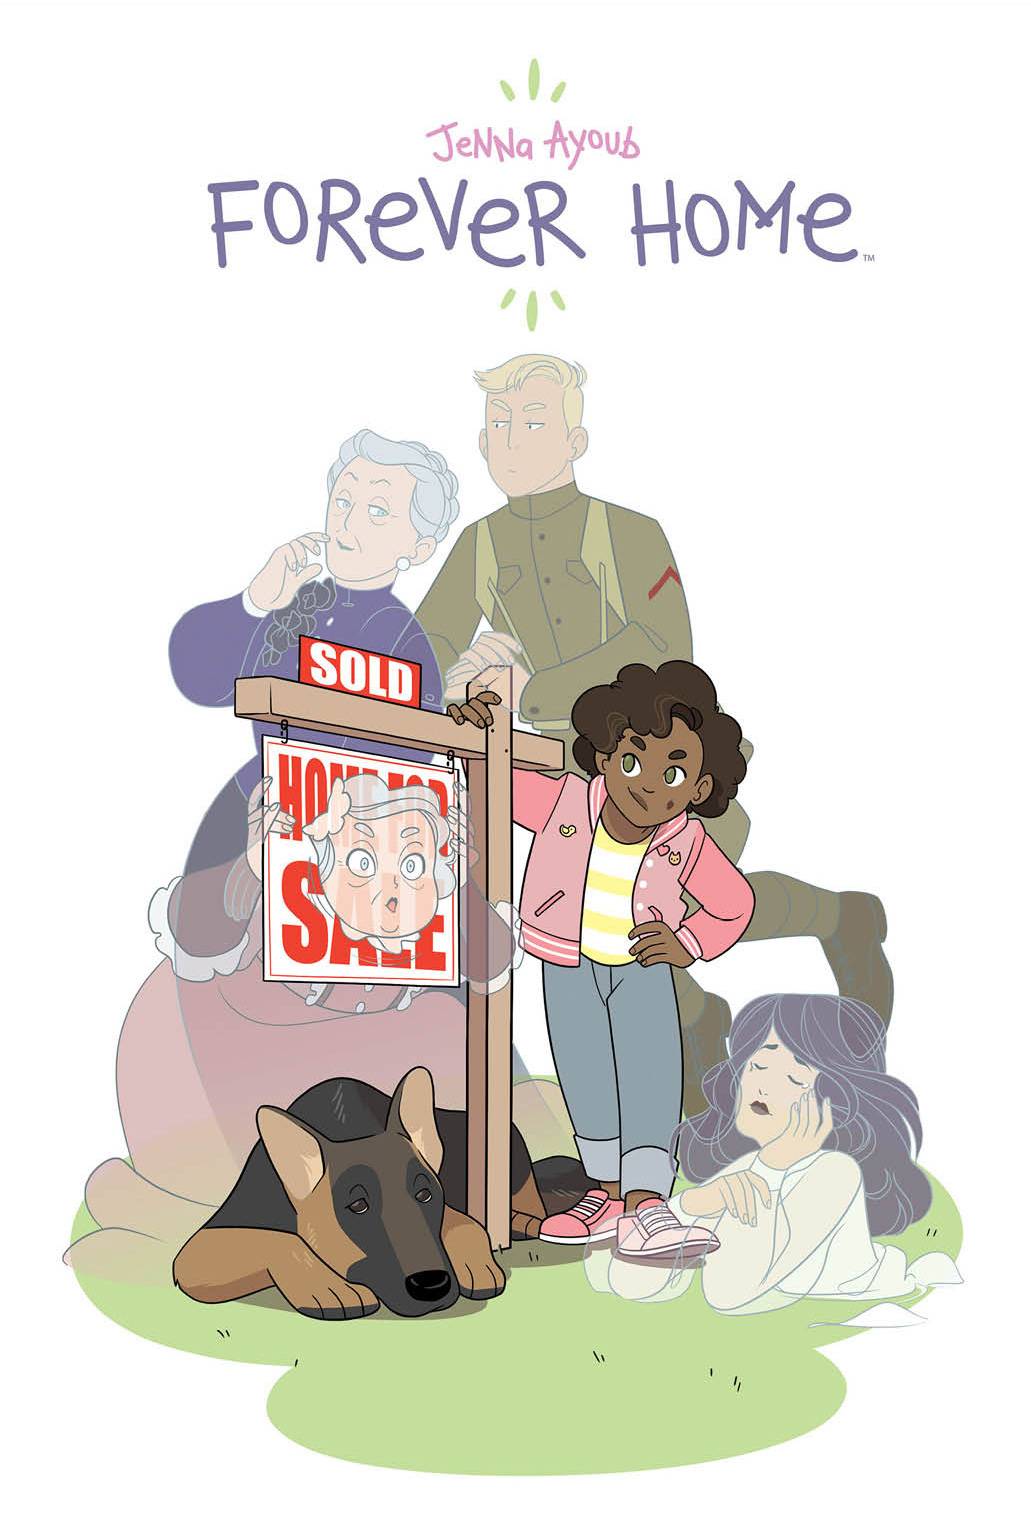 A young Black girl with big chinlength hair ad green eyes leans against a 'SOLD' sign for a house. She is wearing a pink sports jacket over a yellow and white striped top, blue jeans, and pink sneakers. A Doberman is curled at the base of the sale sign. Several translucent ghosts are visible nearby, including a weepy woman, a blond man in military uniform, and an elderly lady in a Victorian dress.